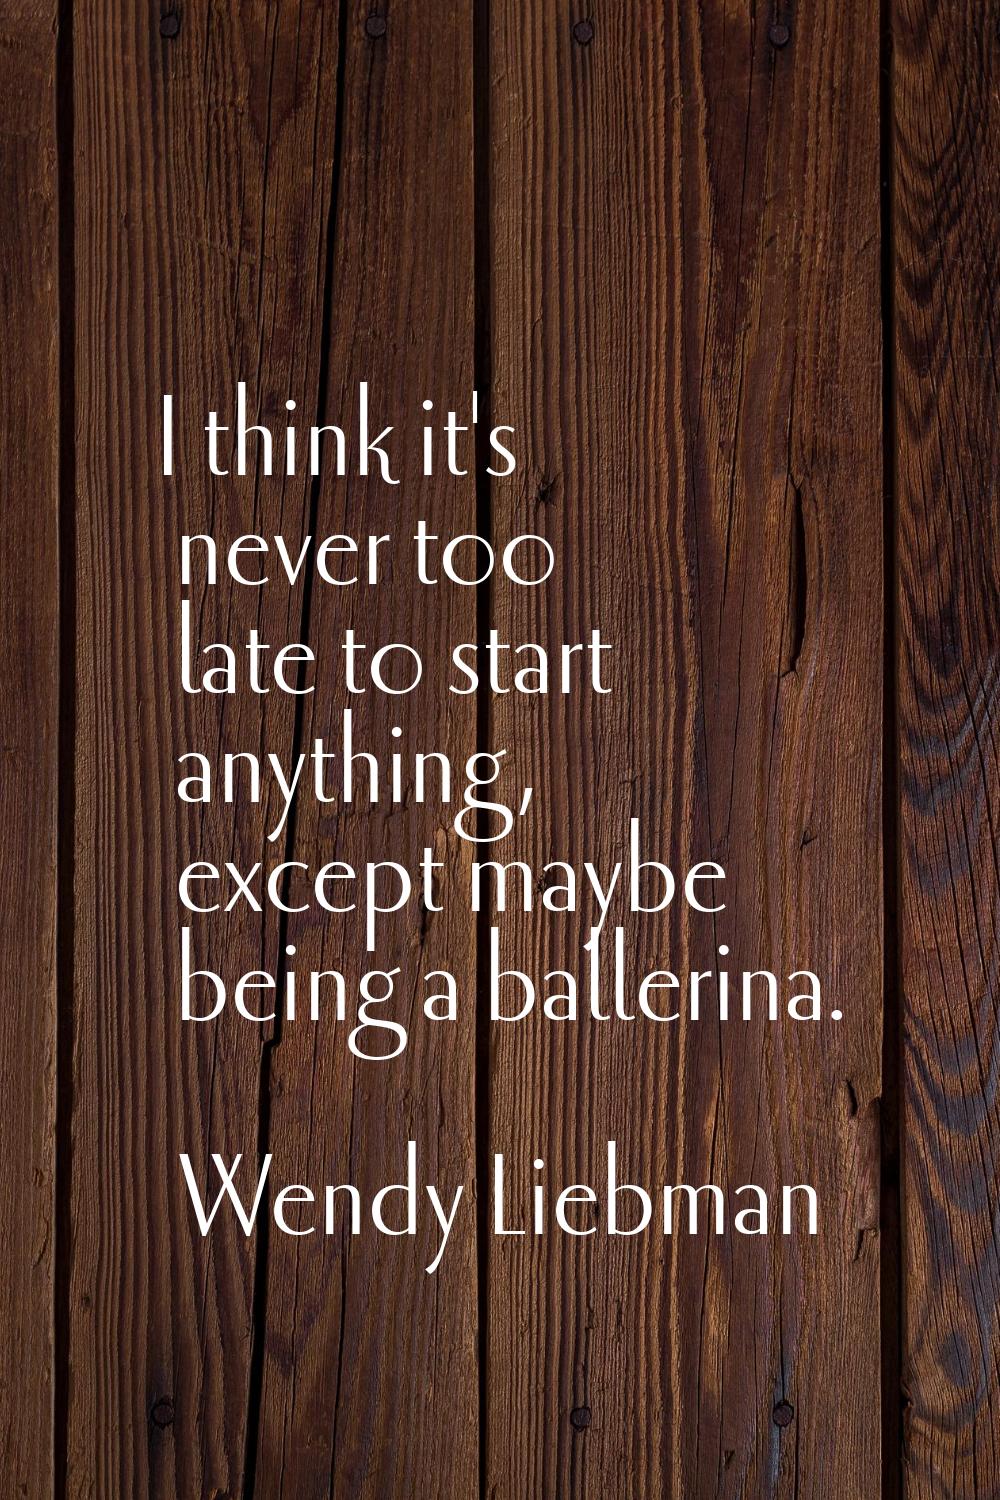 I think it's never too late to start anything, except maybe being a ballerina.